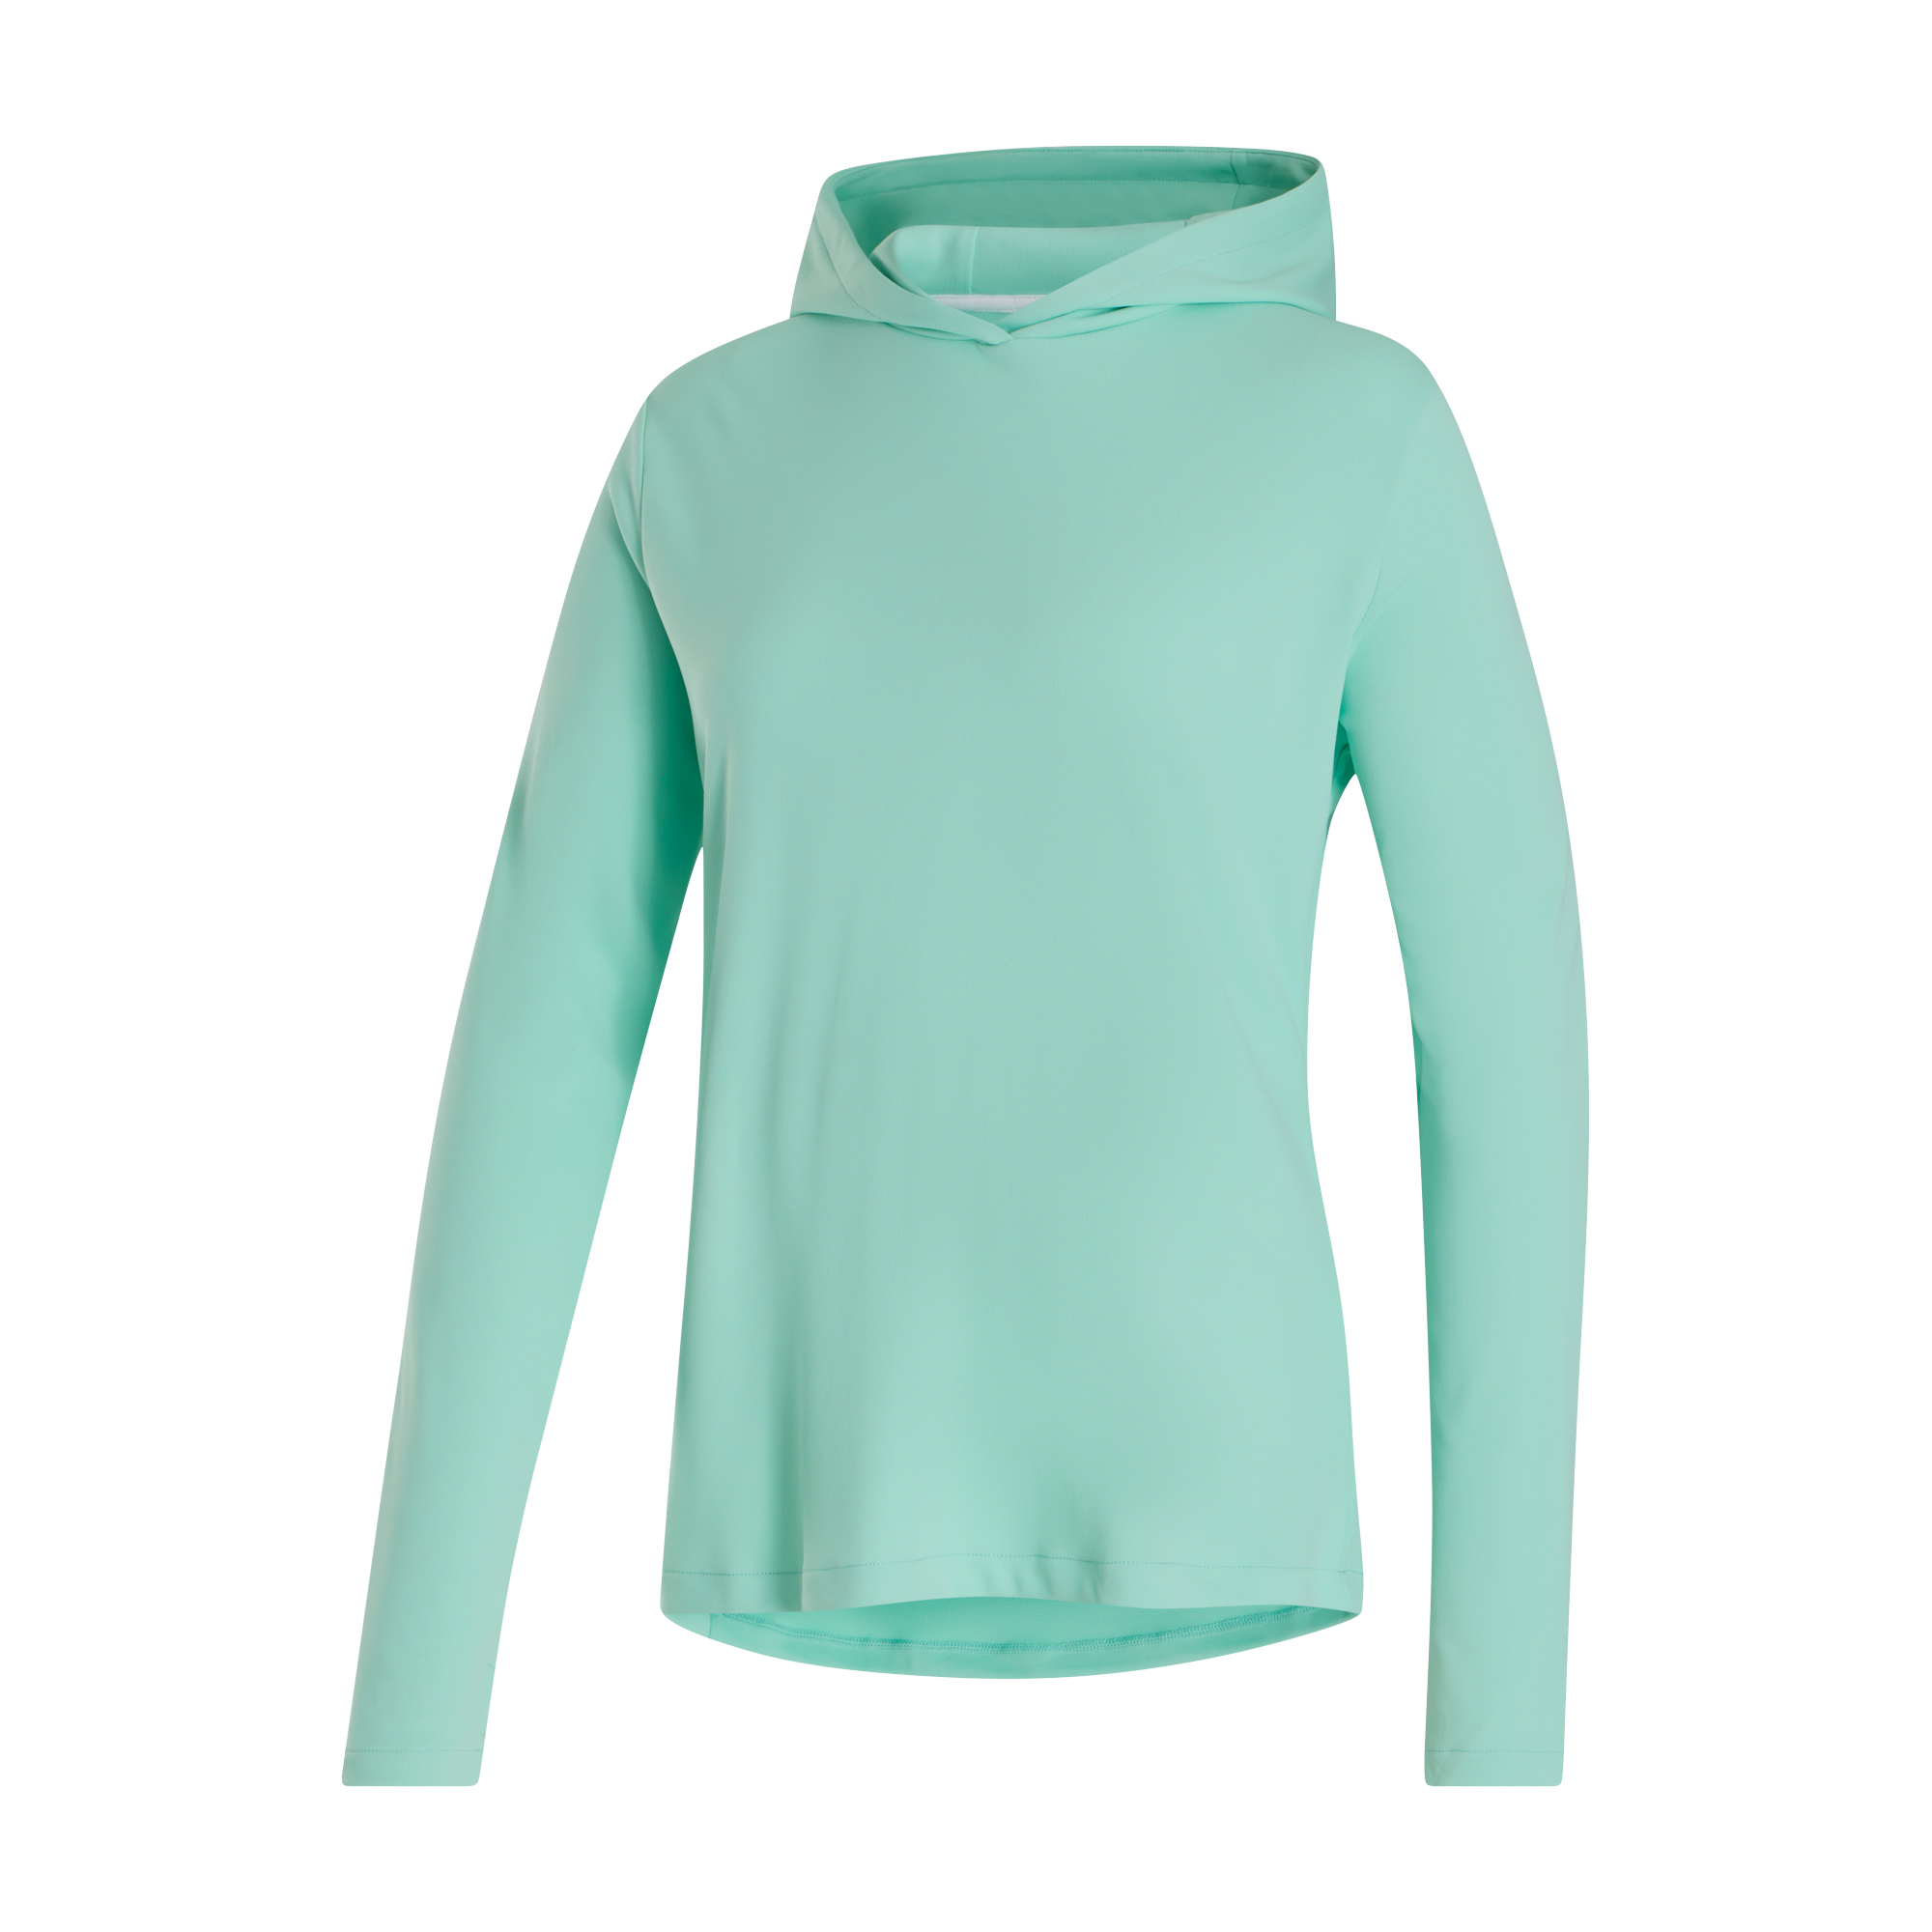 FootJoy Women's TempoSeries Pullover Sun Protection Hoodie Golf Shirt in Light Mint Size M